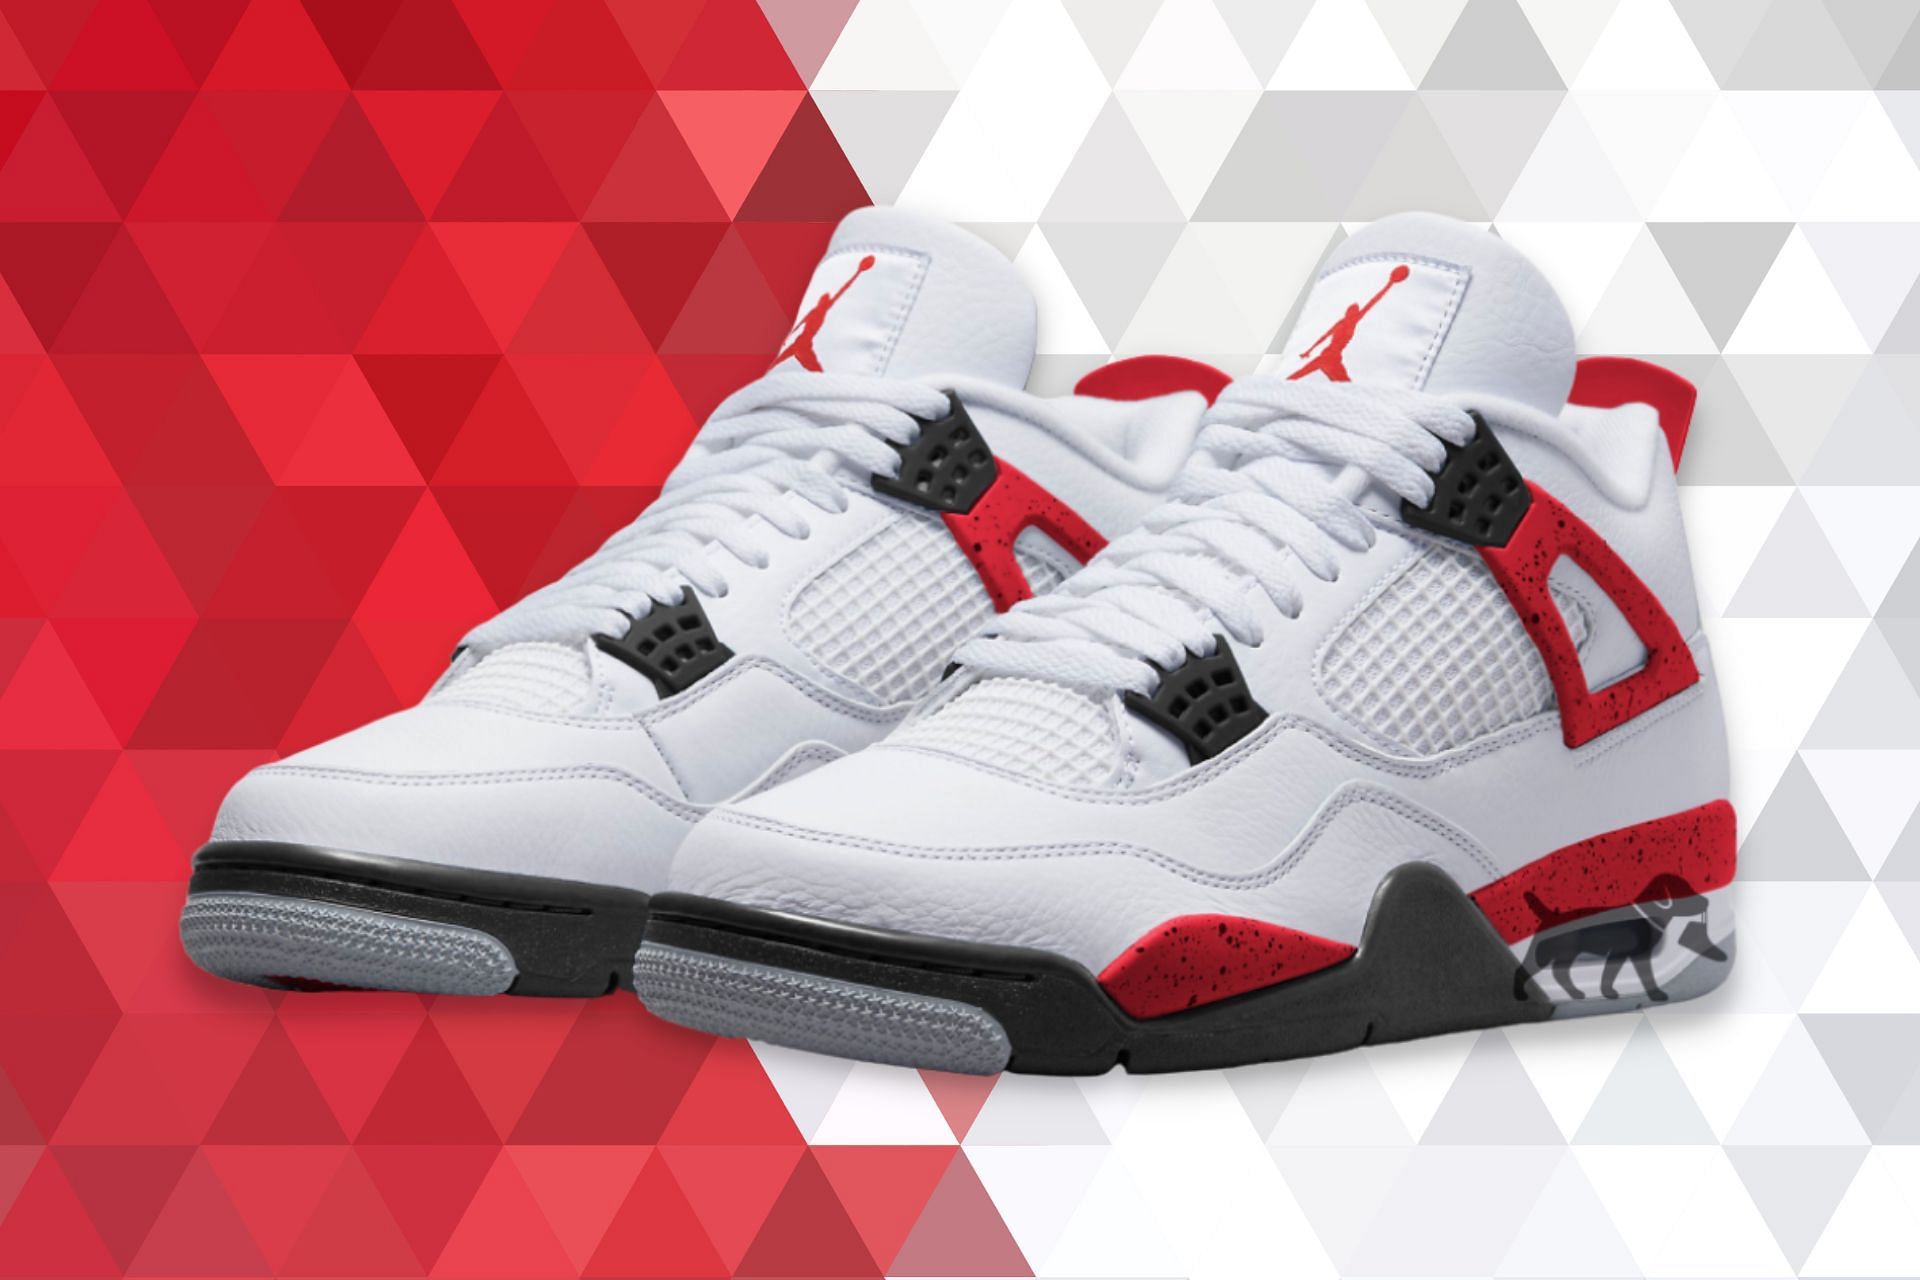 Take a closer look at the AJ4 Fire Red Twist colorway (image via Sole Retriever)